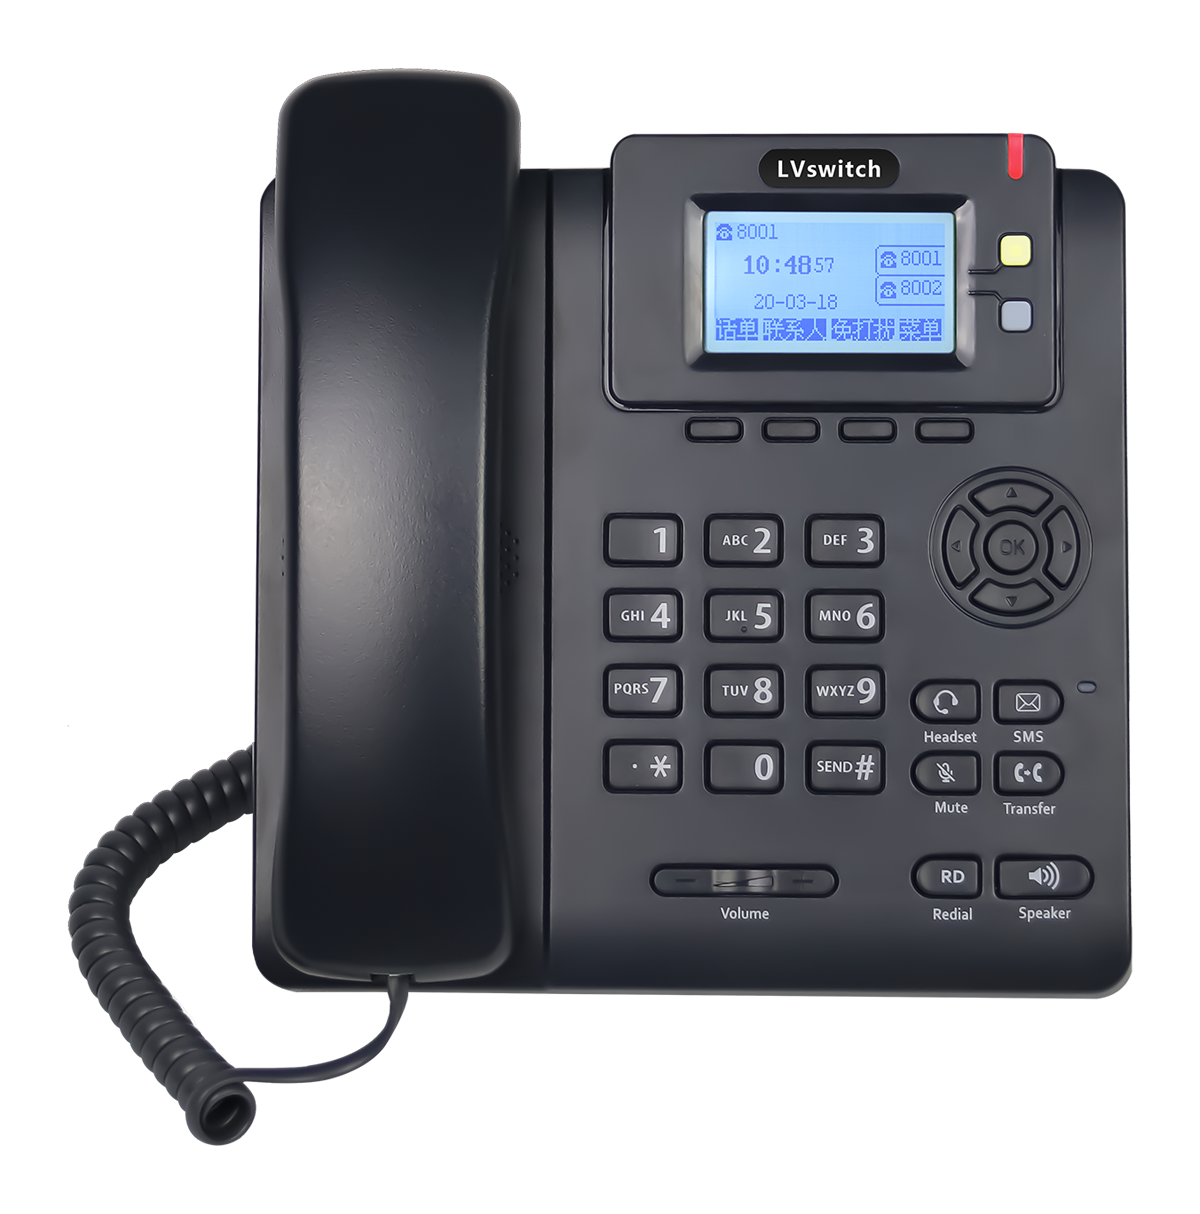 Solutions to Problems Affecting the Quality of IP Phone Calls